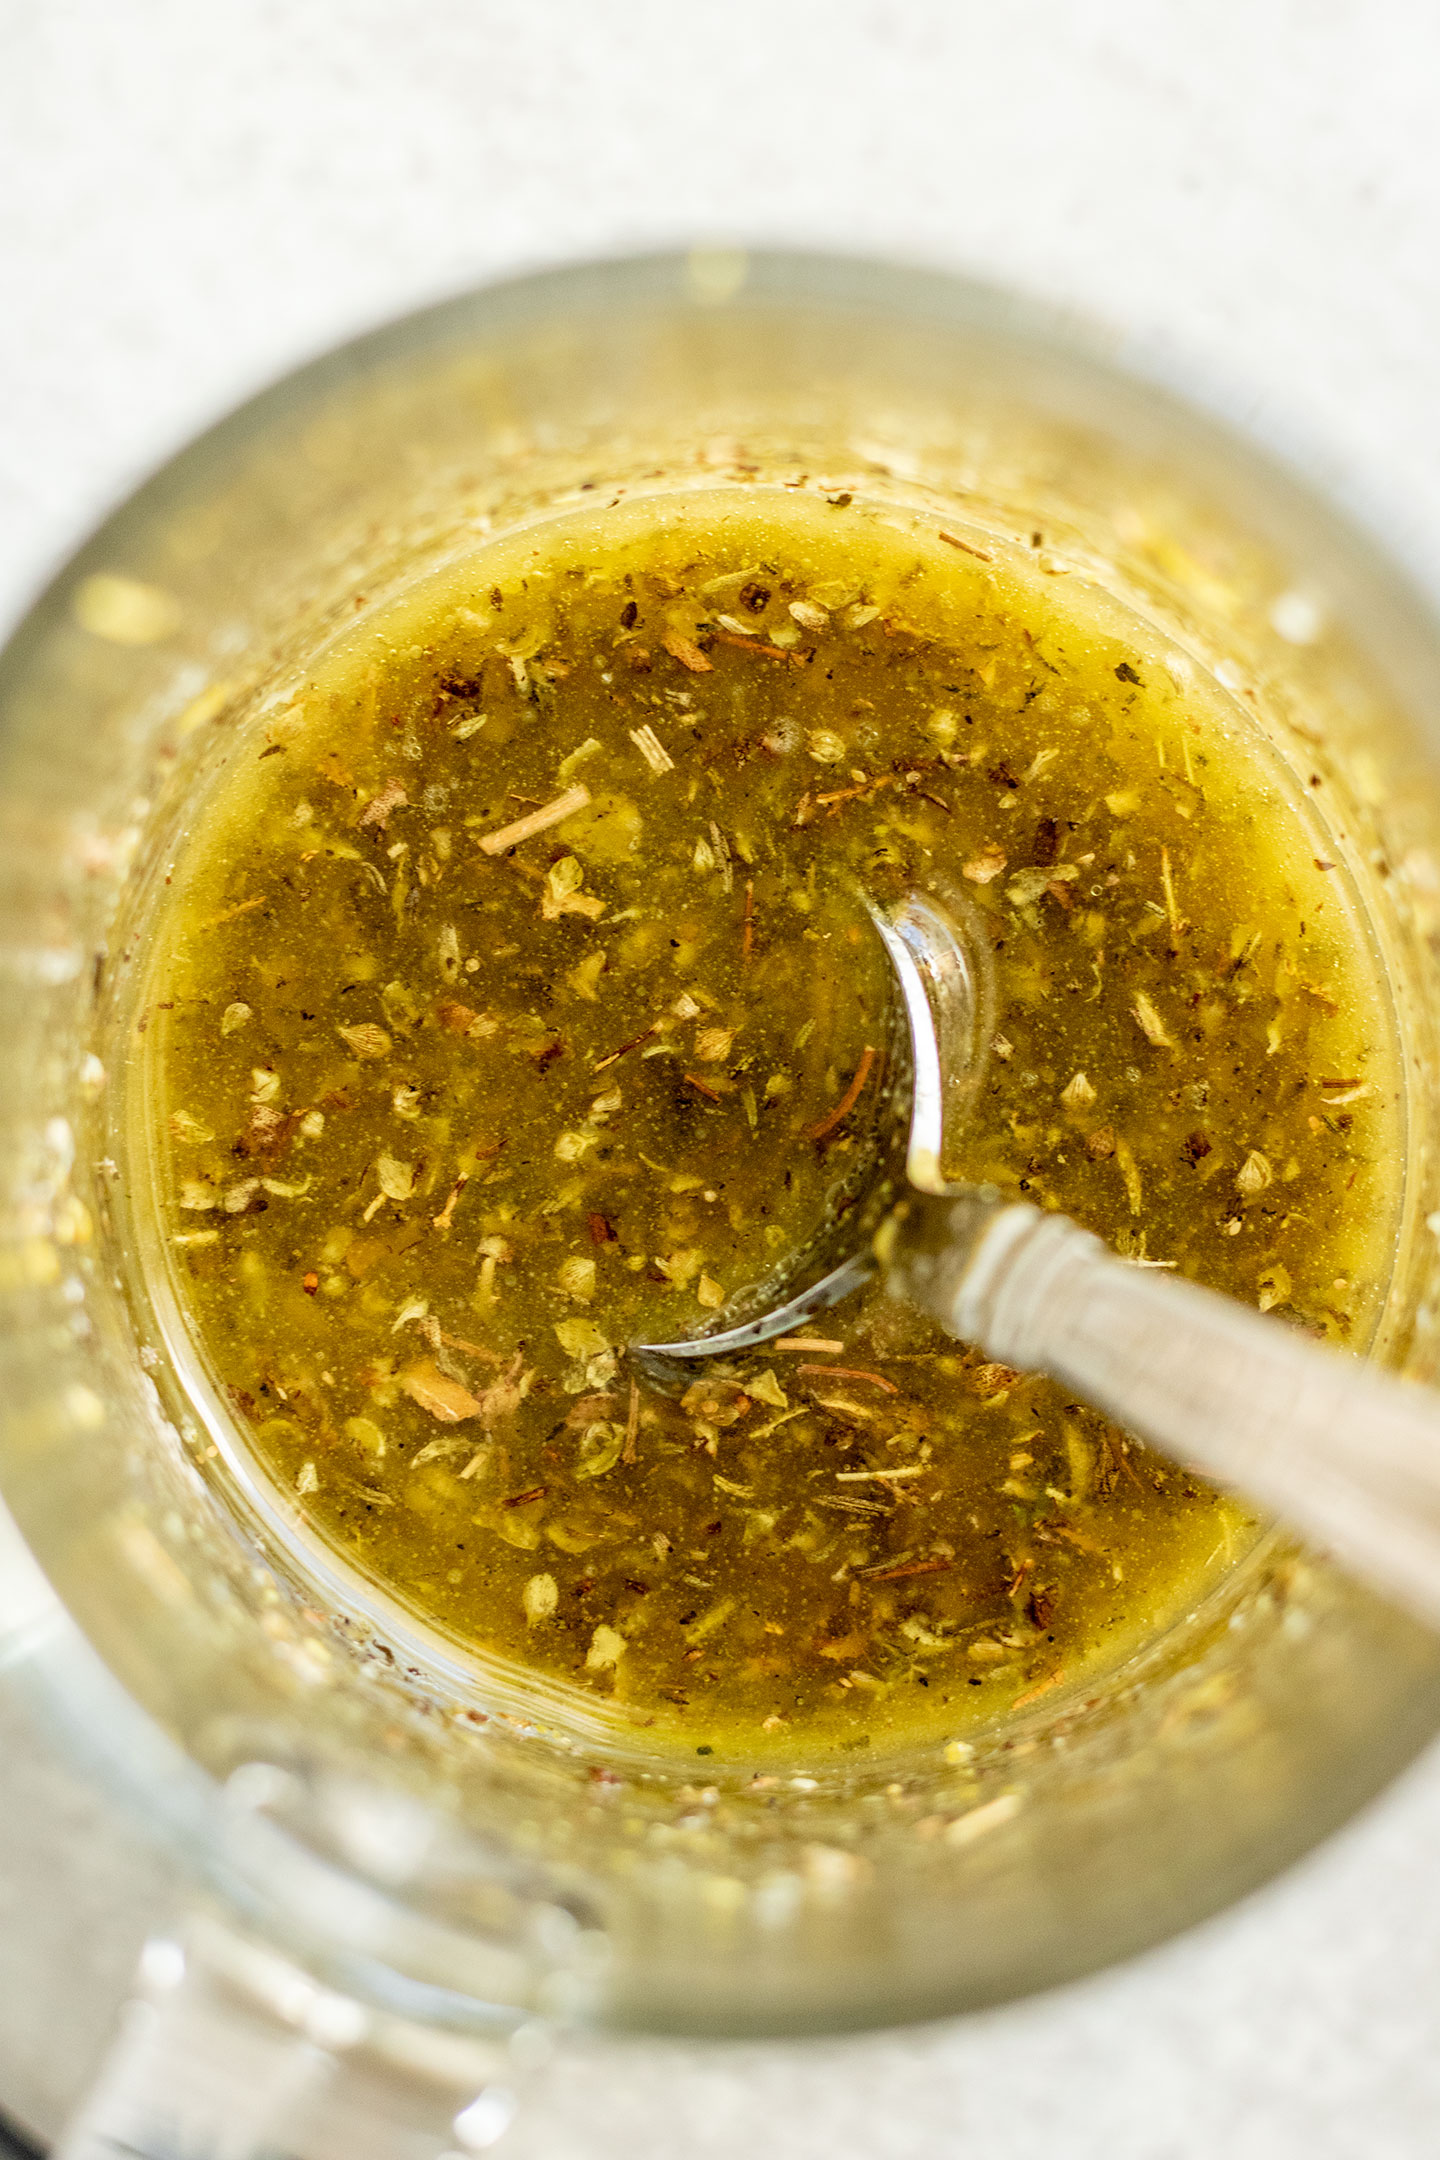 Mixed lemon garlic and herb dressing in a glass with a spoon.